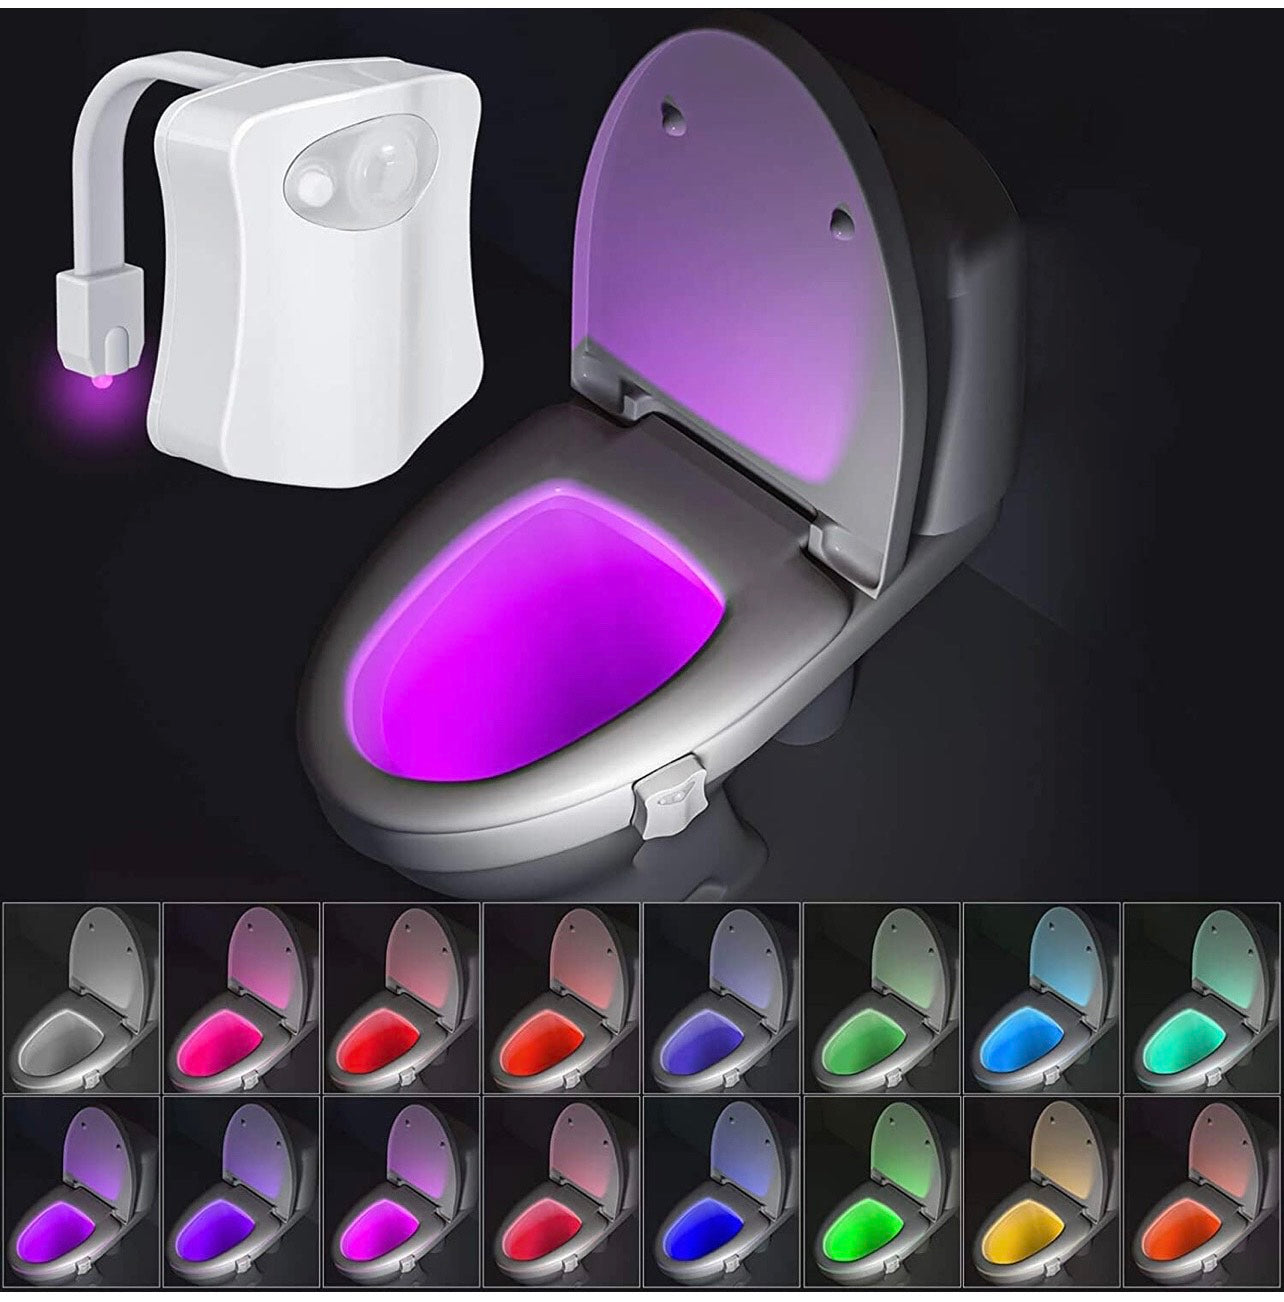 Baby Products Online - Toilet Night Lighting by Ailun Motion